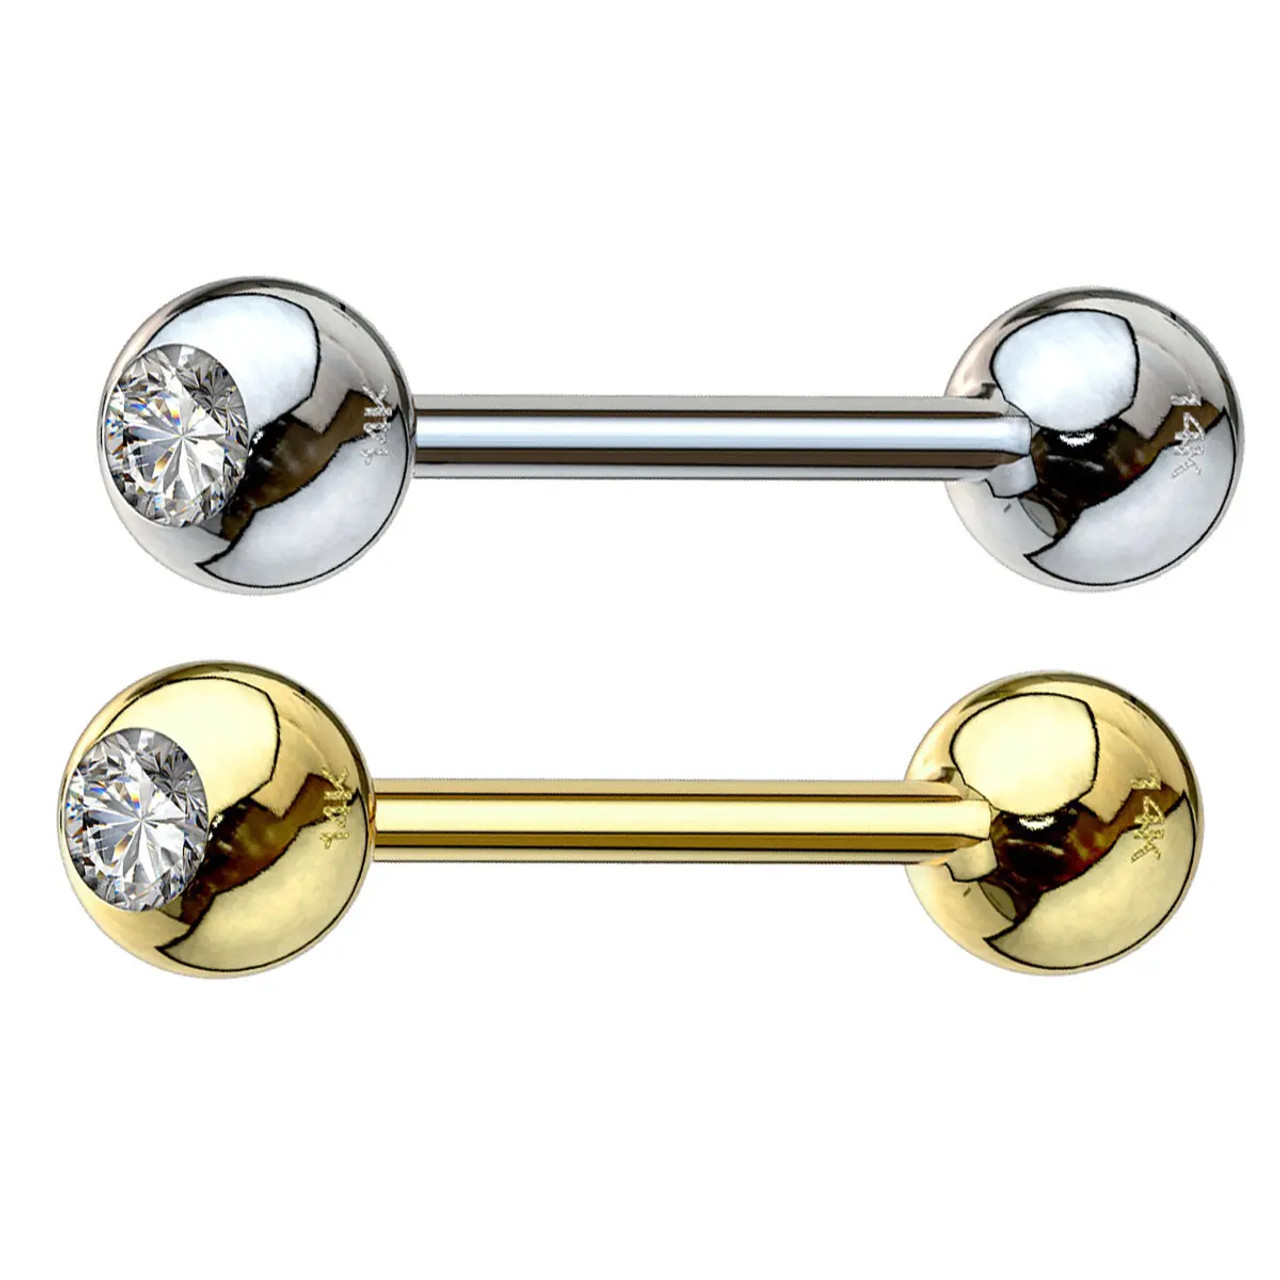 14G Tongue Ring 14K Solid Gold Clear CZ Nipple Rings Straight Barbell Bar Tongue Piercing Jewelry 5/8